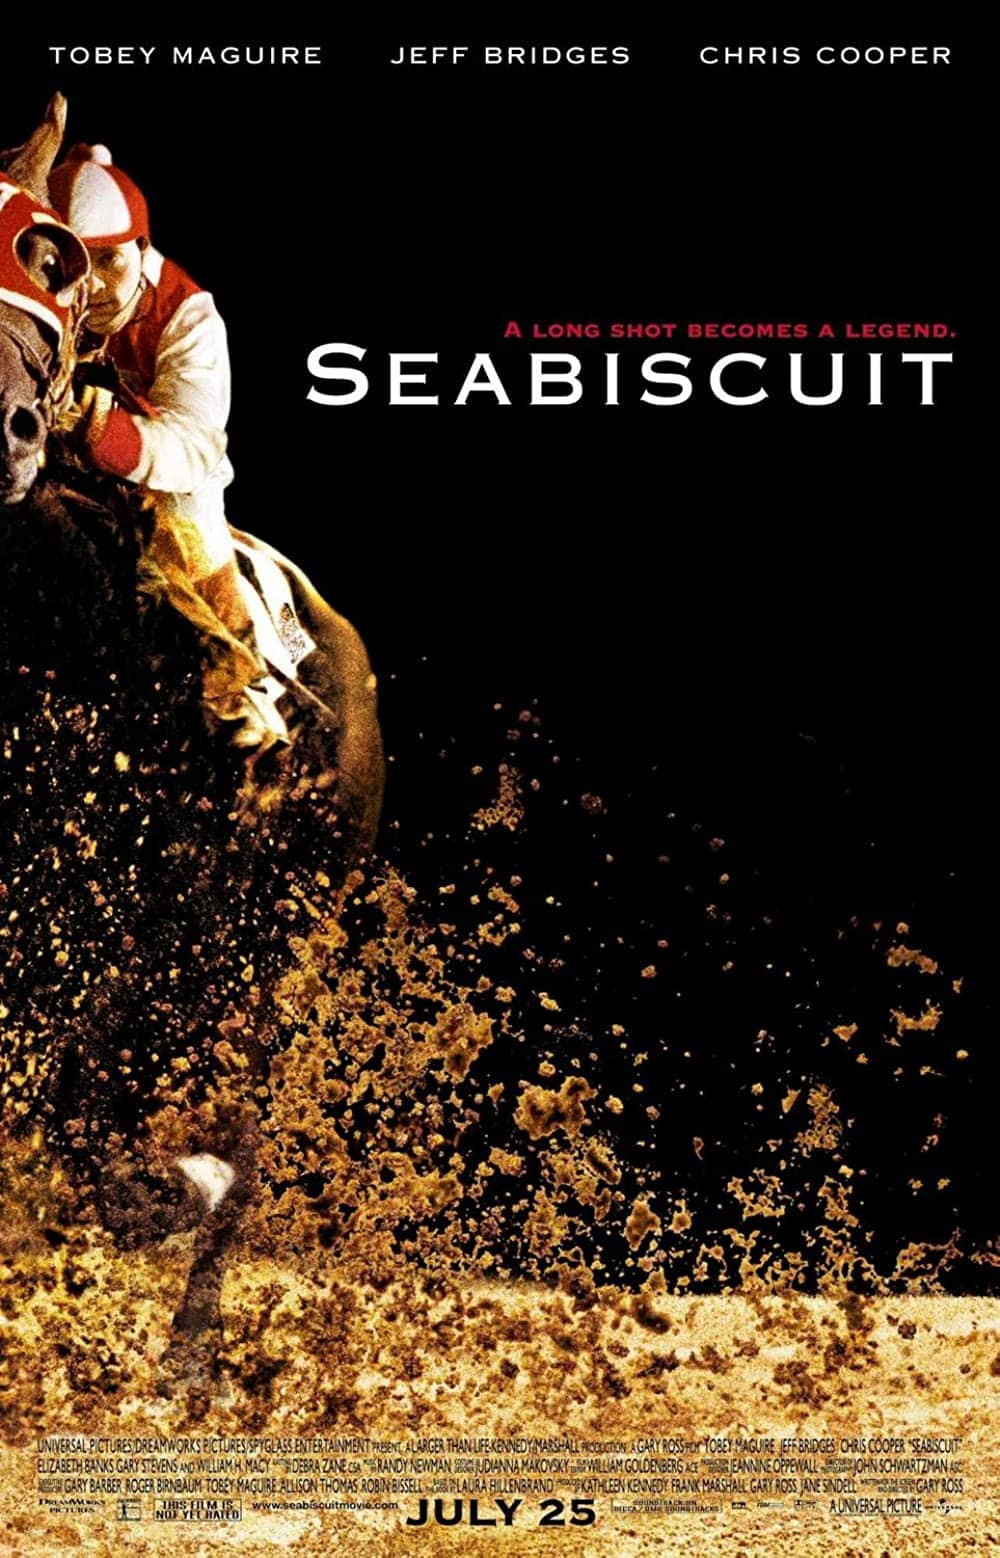 Seabiscuit (2003) Best Horse Racing Movies to Feel The Life